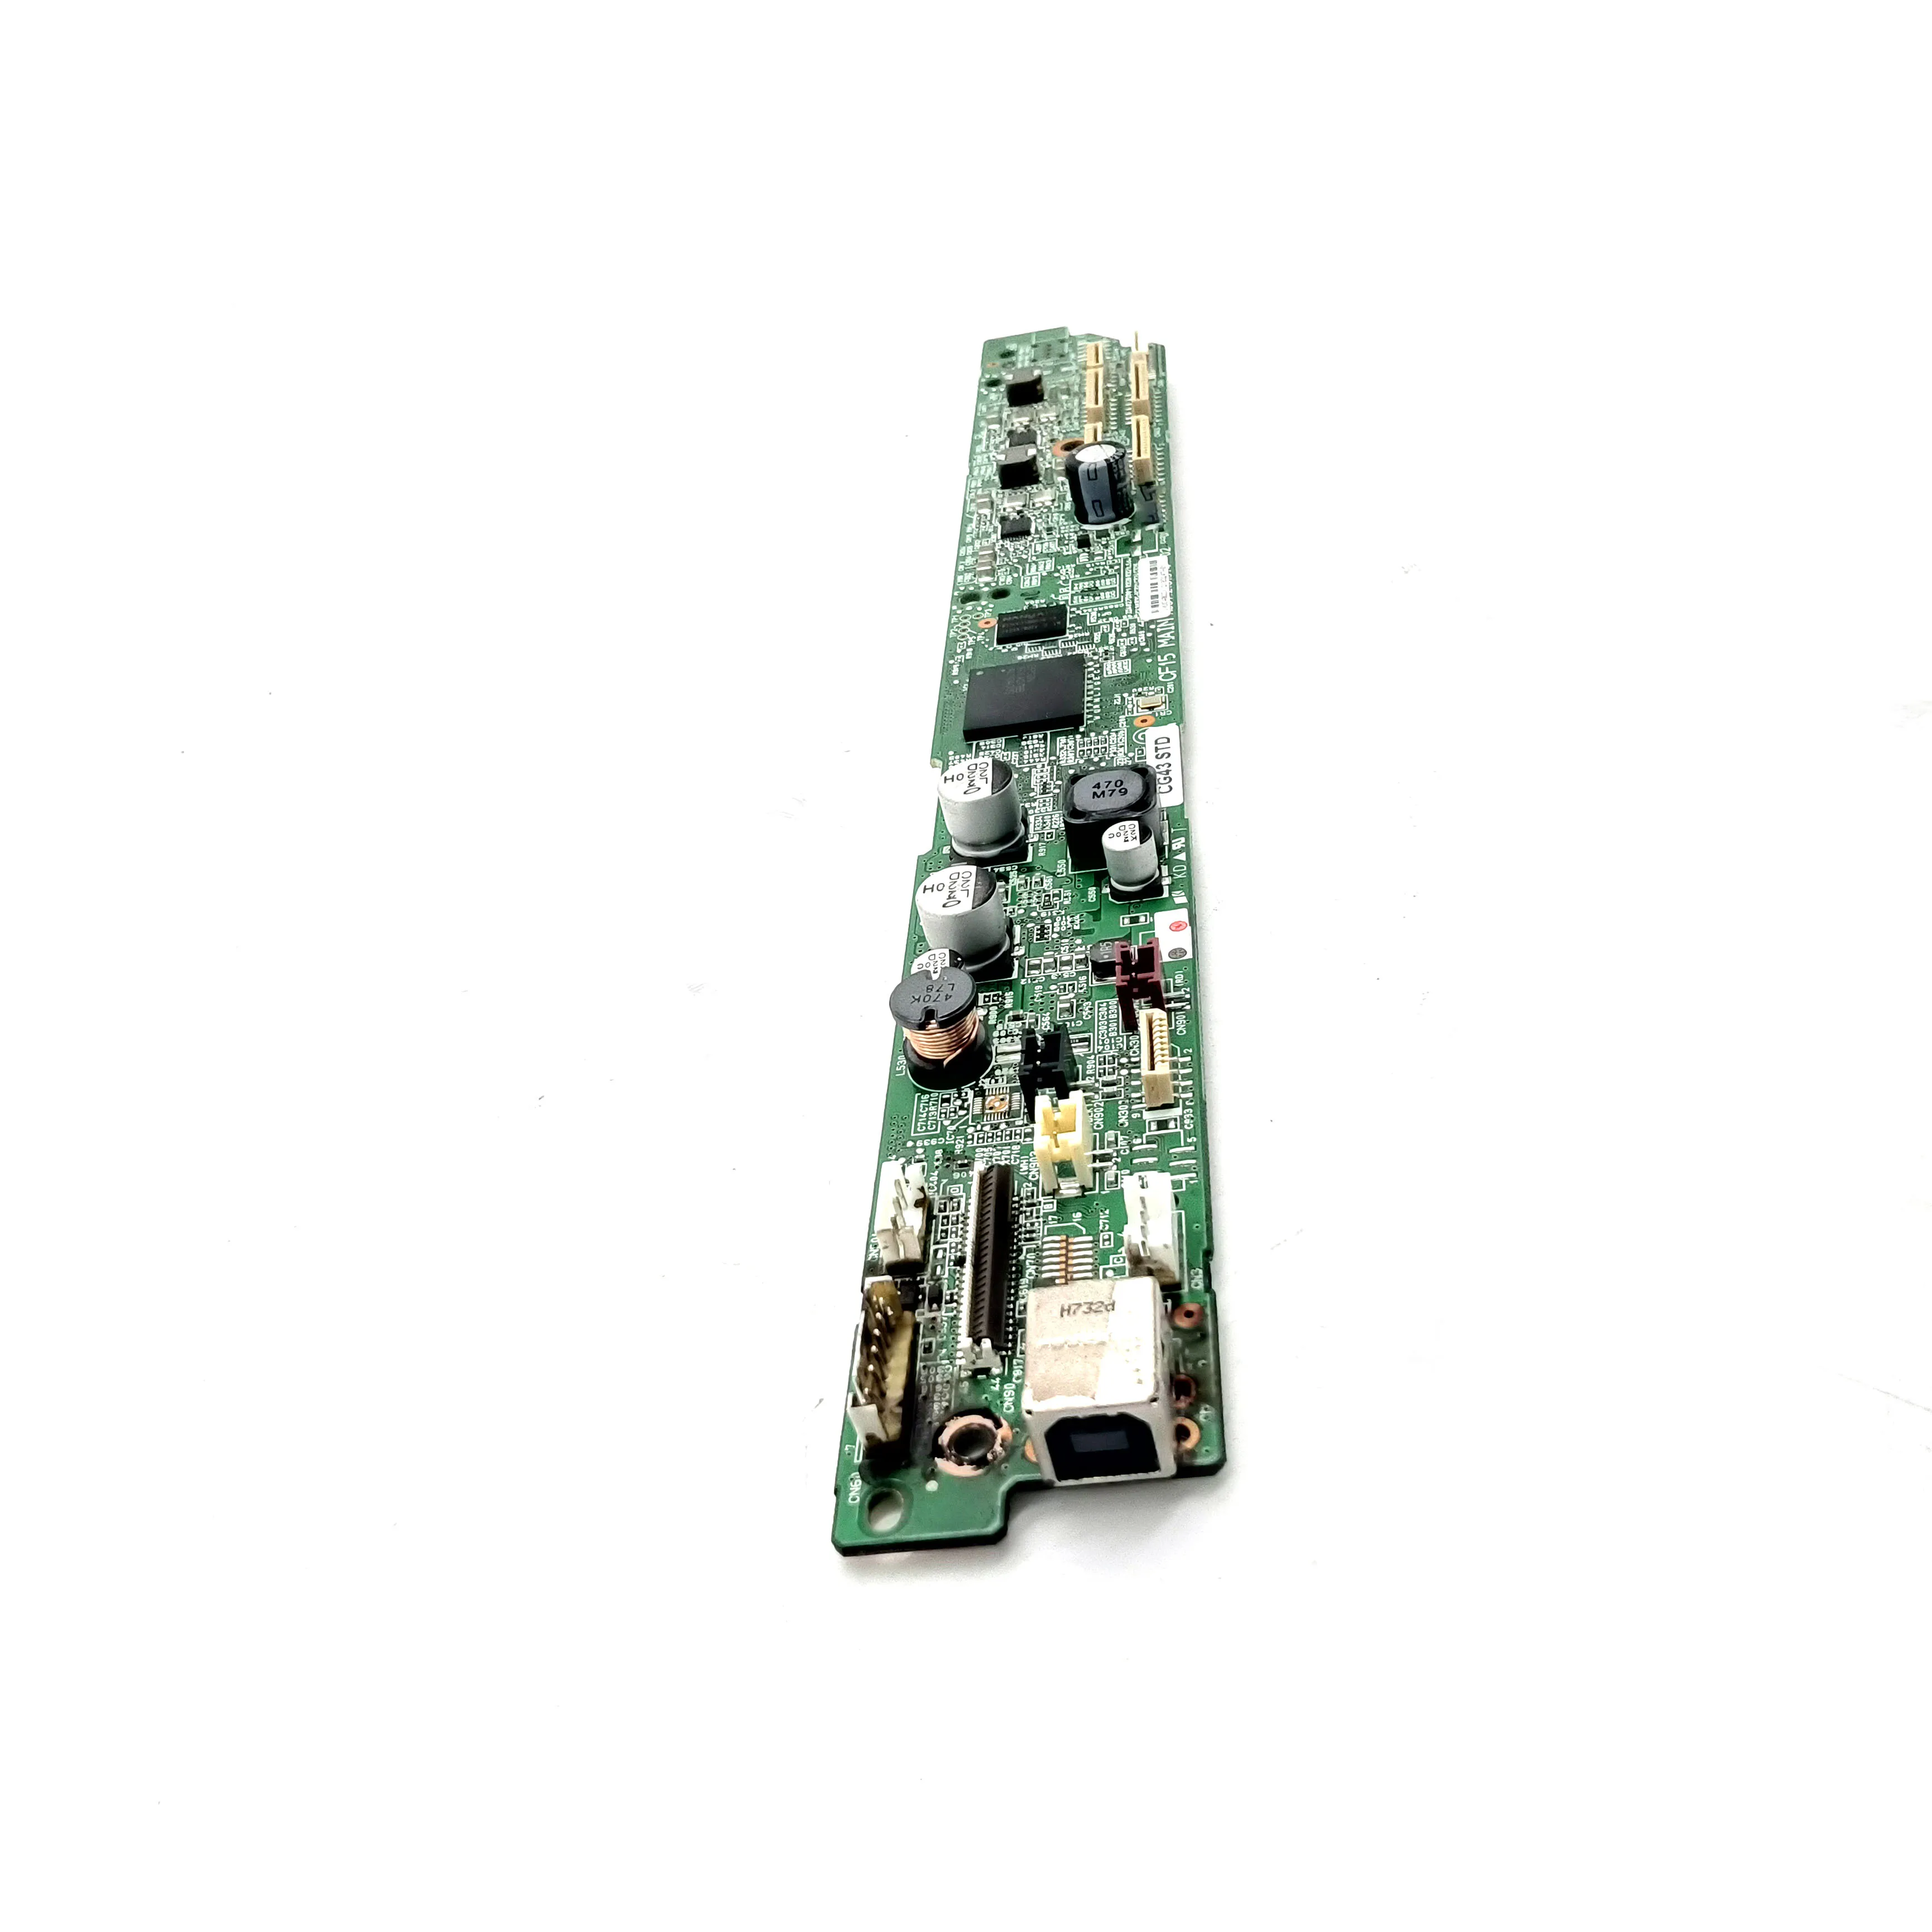 

Main Board Motherboard CG43 STD fits for Epson XP-15010